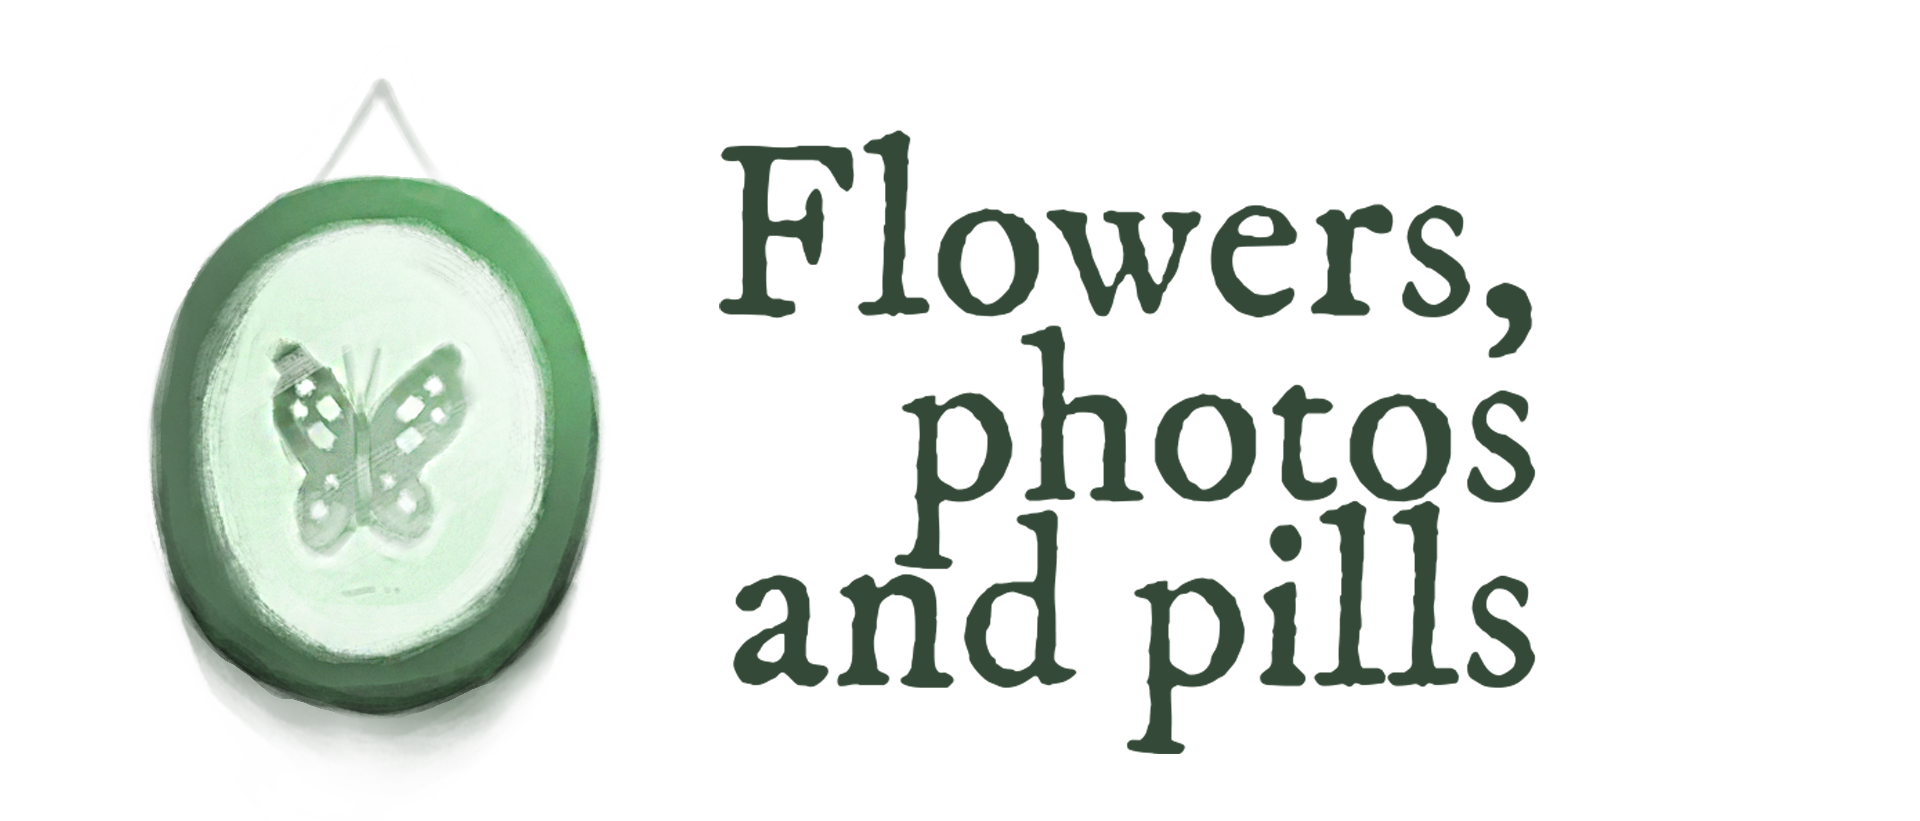 Flowers, photos and pills